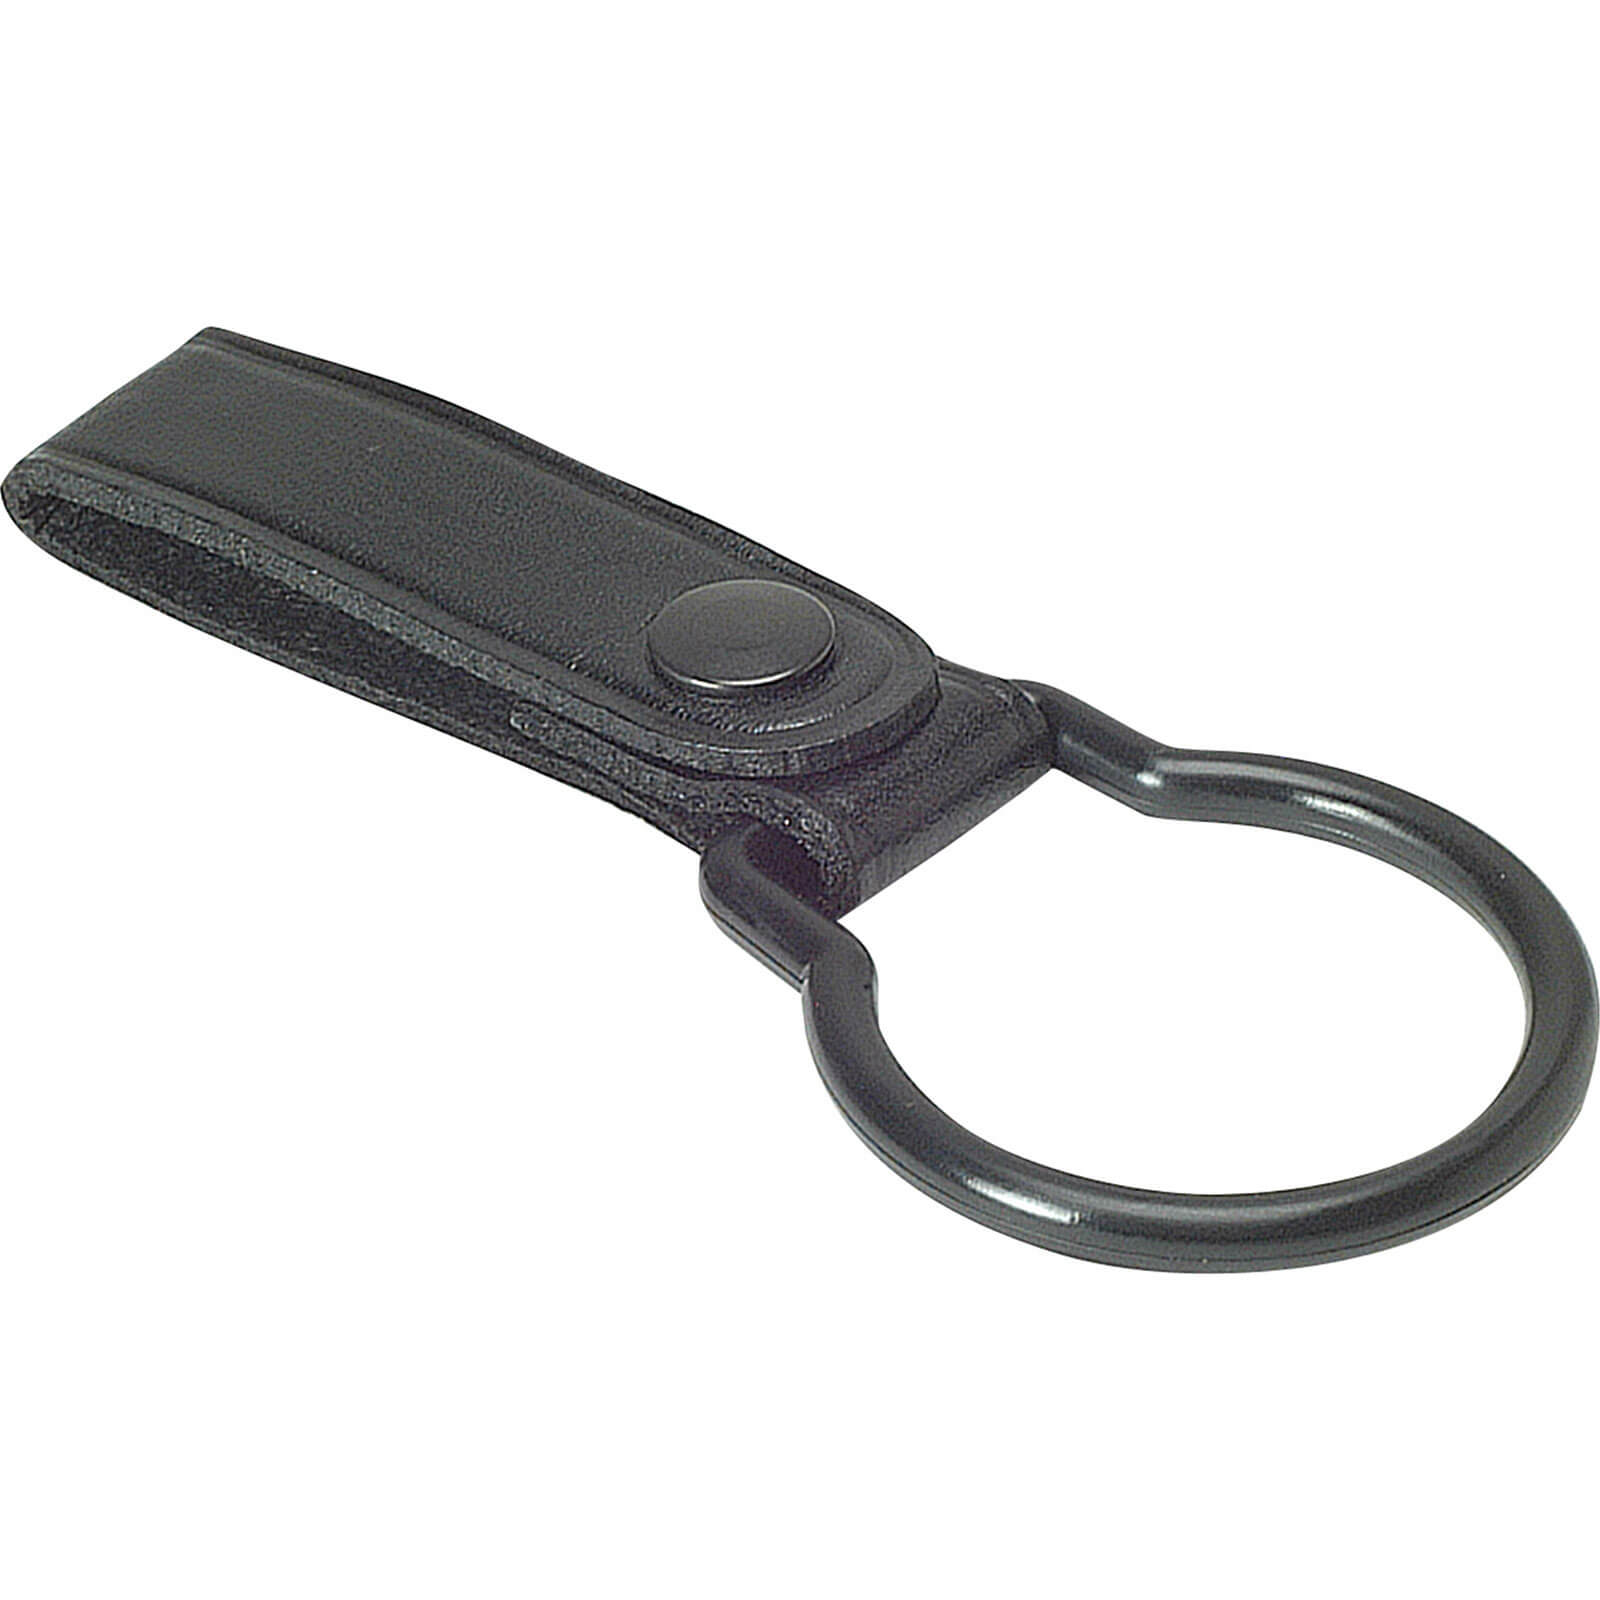 Image of Maglite Leather Belt Loop Holder for D Cell Torches